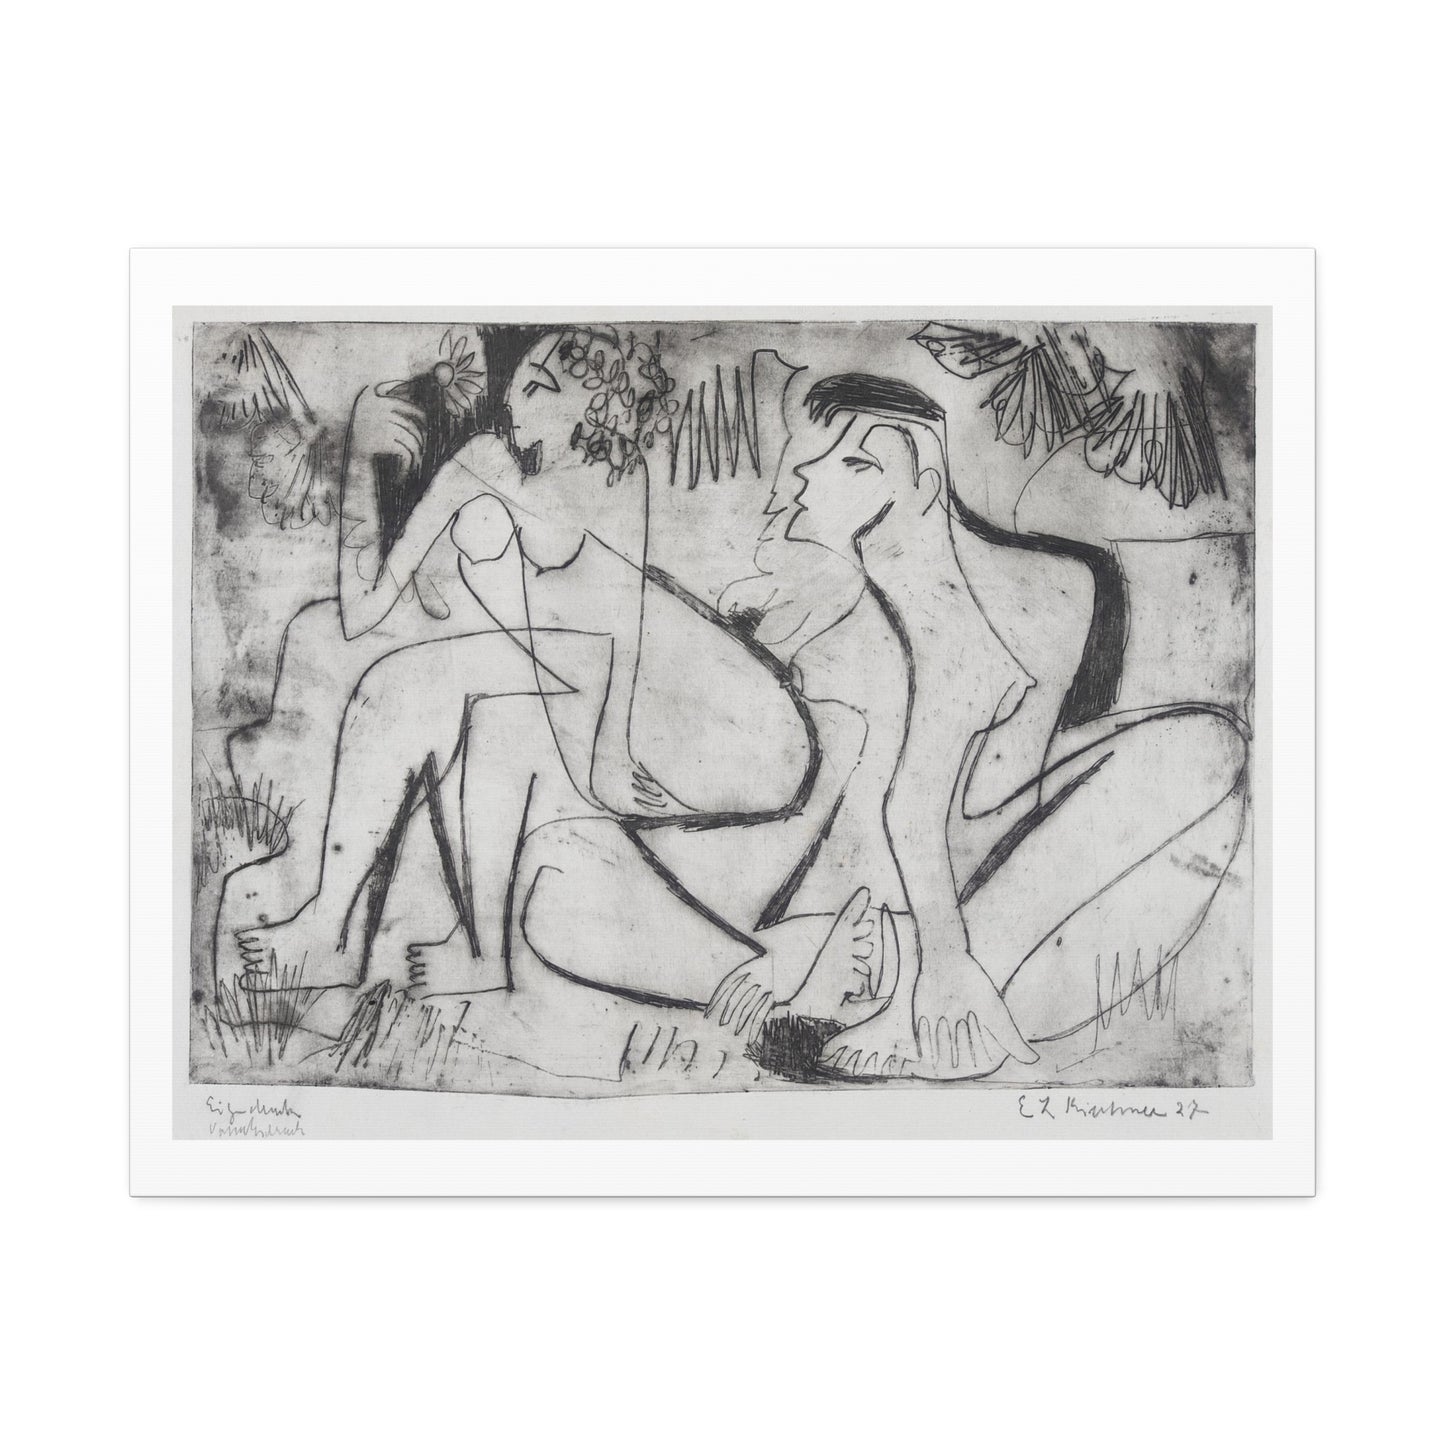 Zwei Nackte Mädchen in Freien 'Two Naked Girls Outdoors' by Ernst Ludwig Kirchner, Art Print from the Original on Canvas